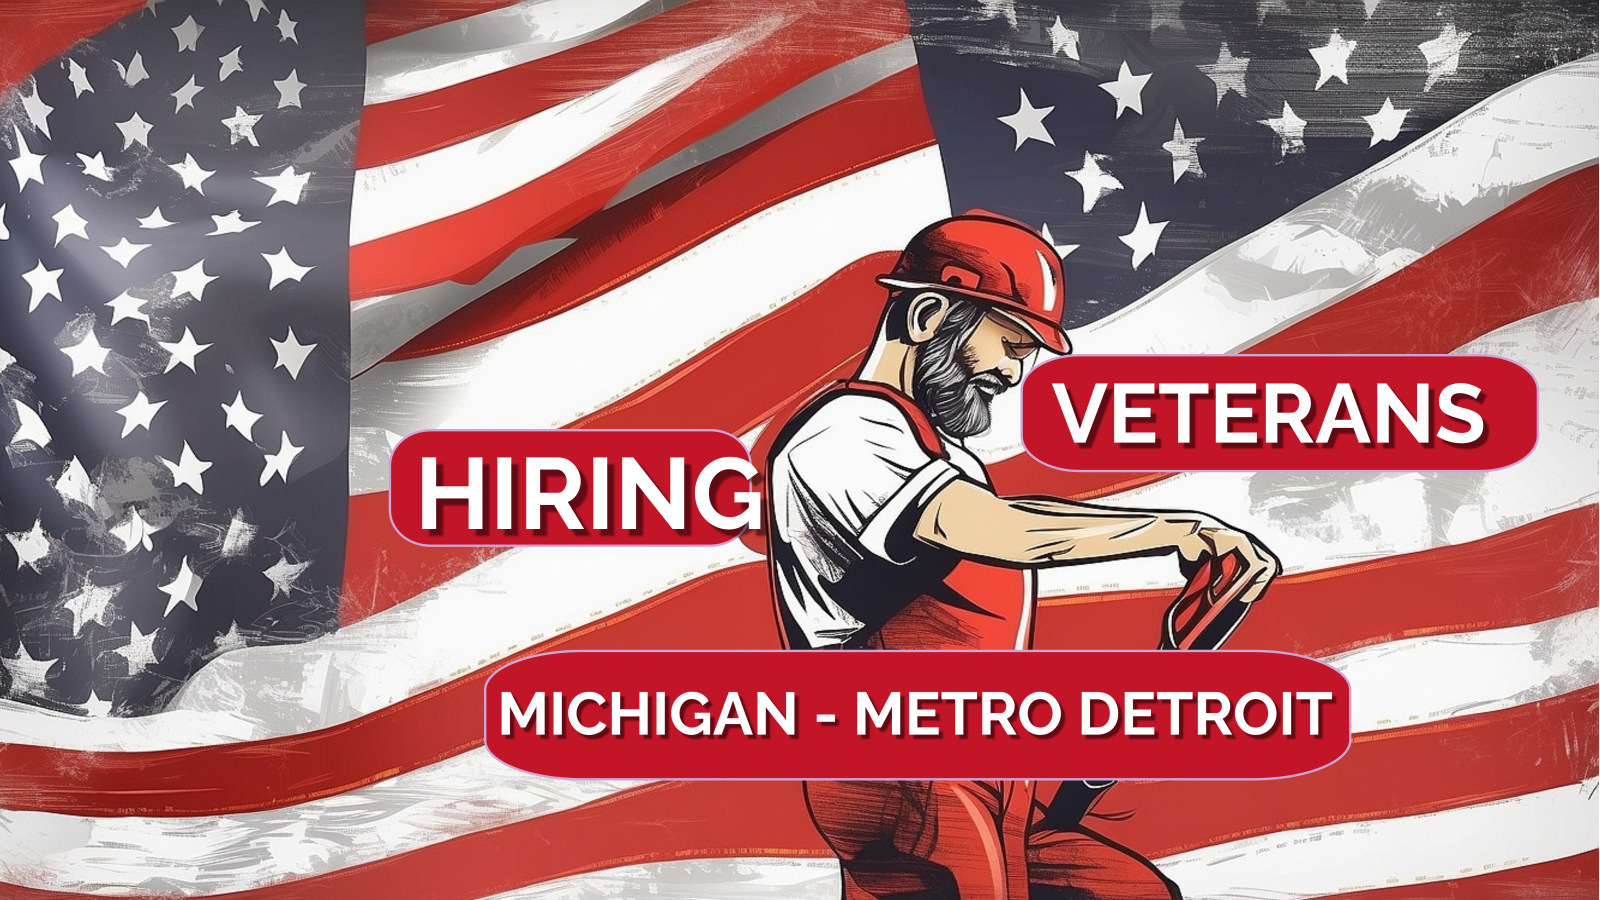 Michigan Veterans: Ensuring Workplace Safety and Security